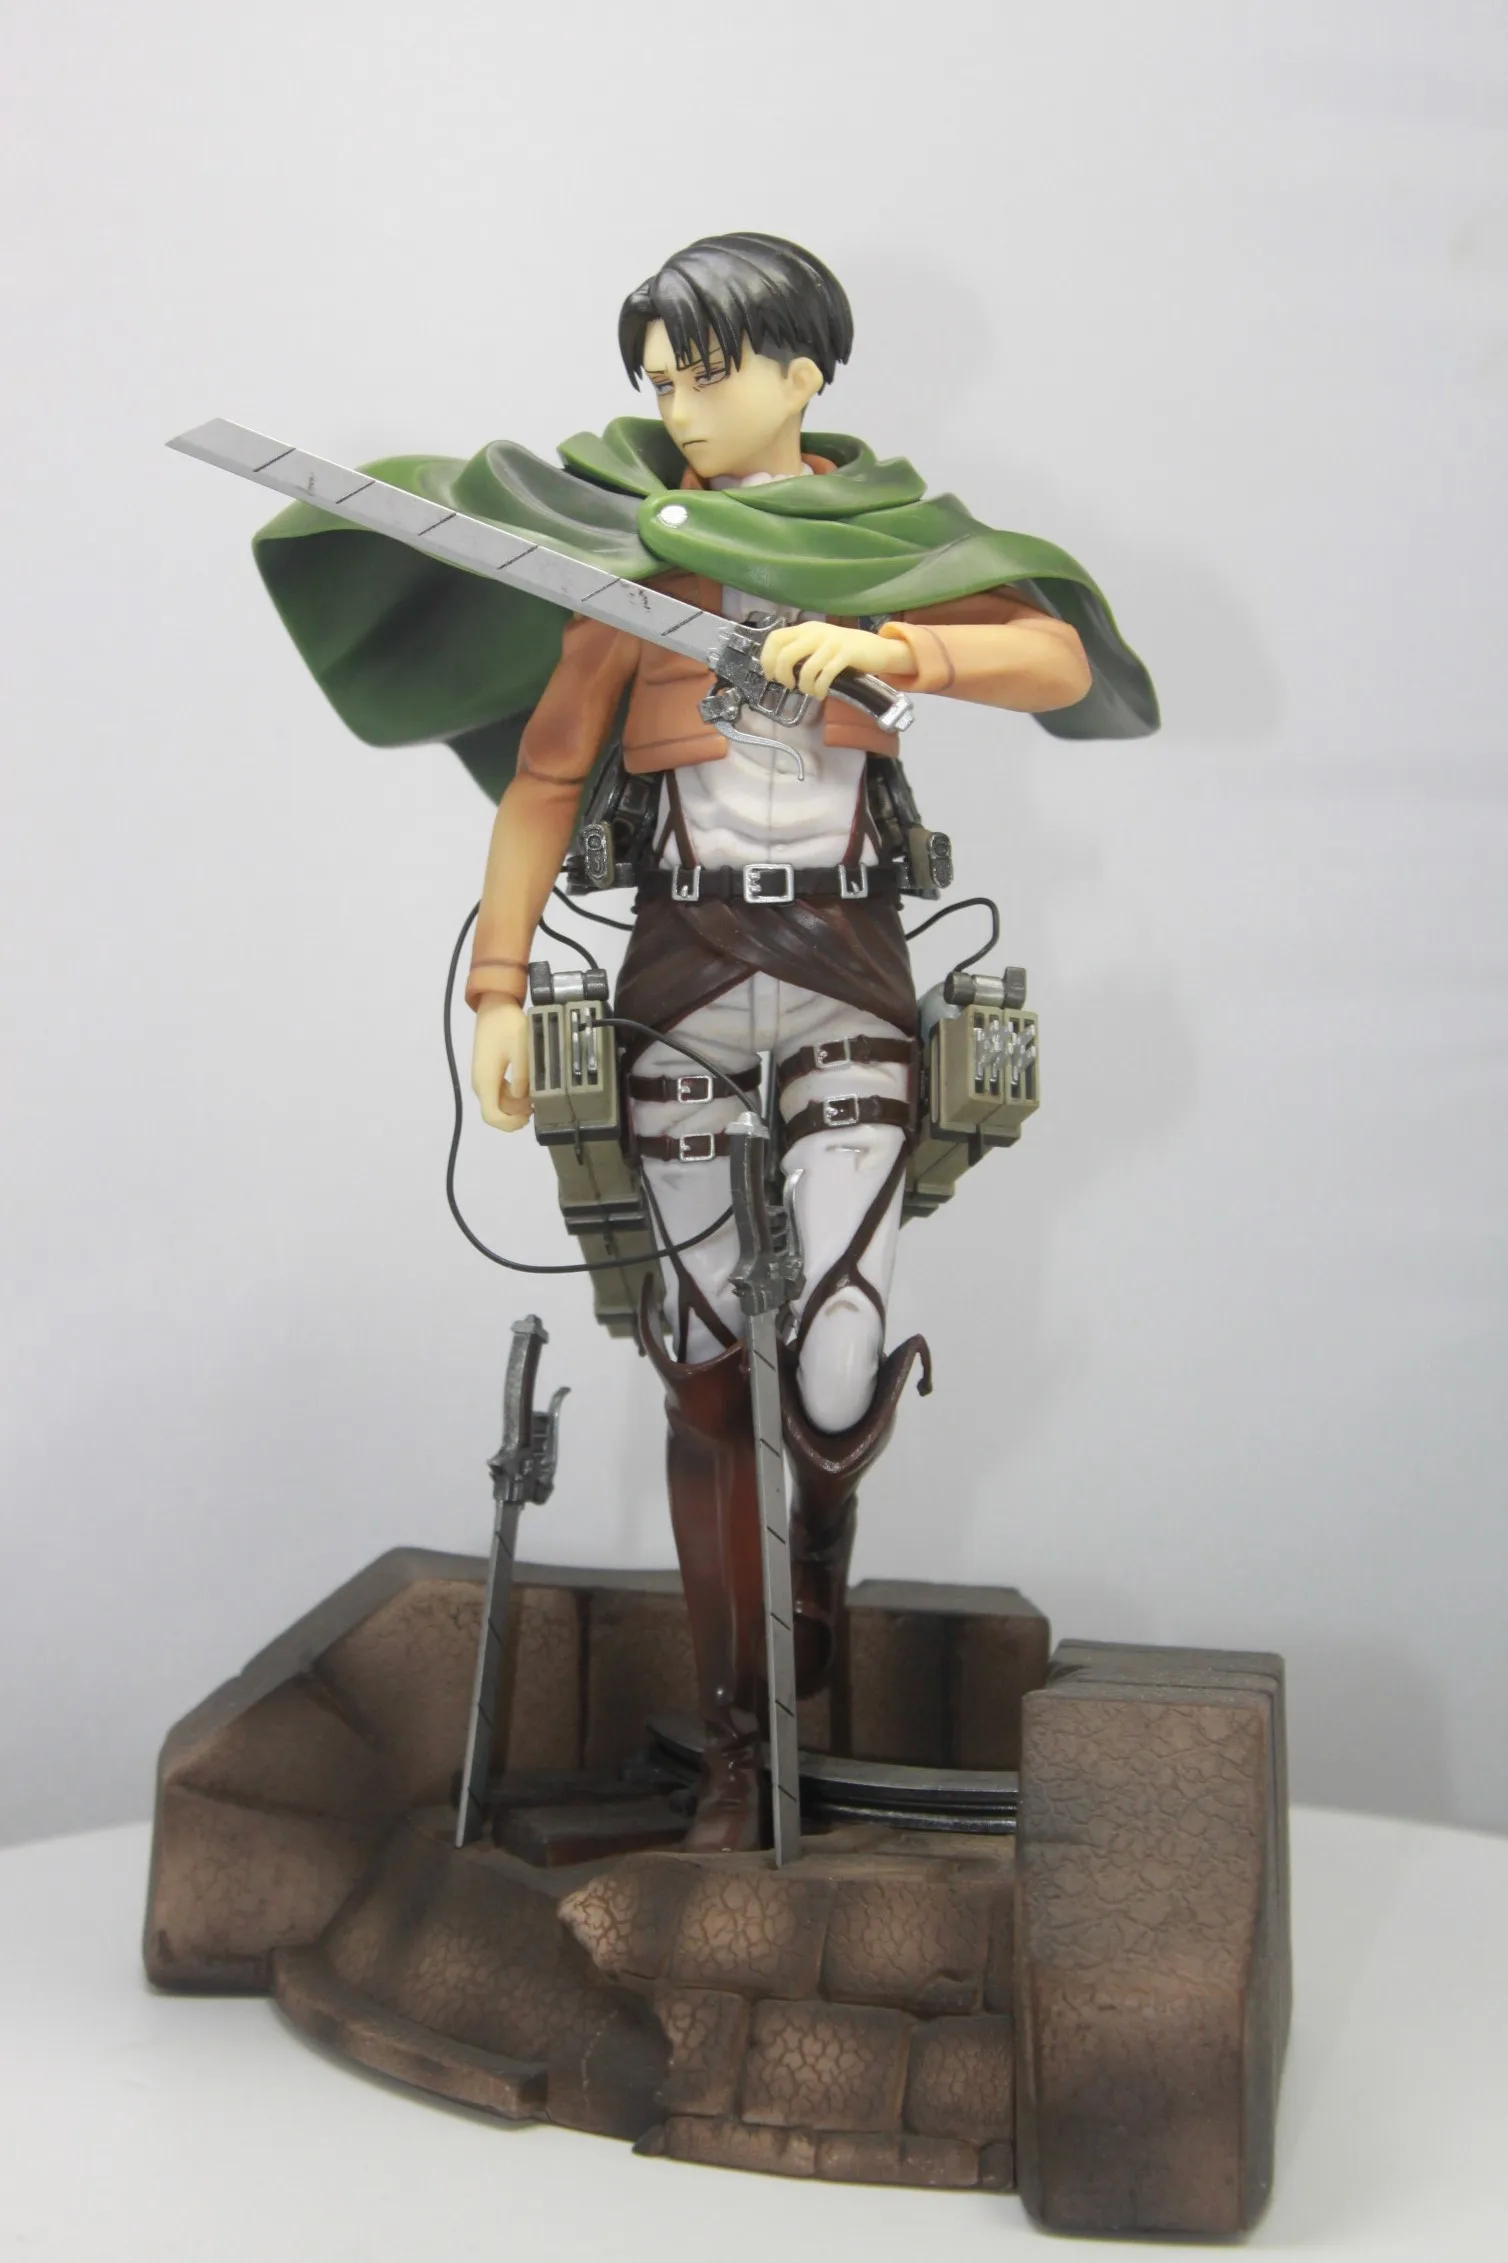 Attack On Titan Levi Ackerman Action Figure One Piece Figure Luffy Mini Collections Model Toys Gift Anime Action Figure Buy One Piece Figure Luffy Mini Collections Model Toys Anime Action Figure Attack On Titan